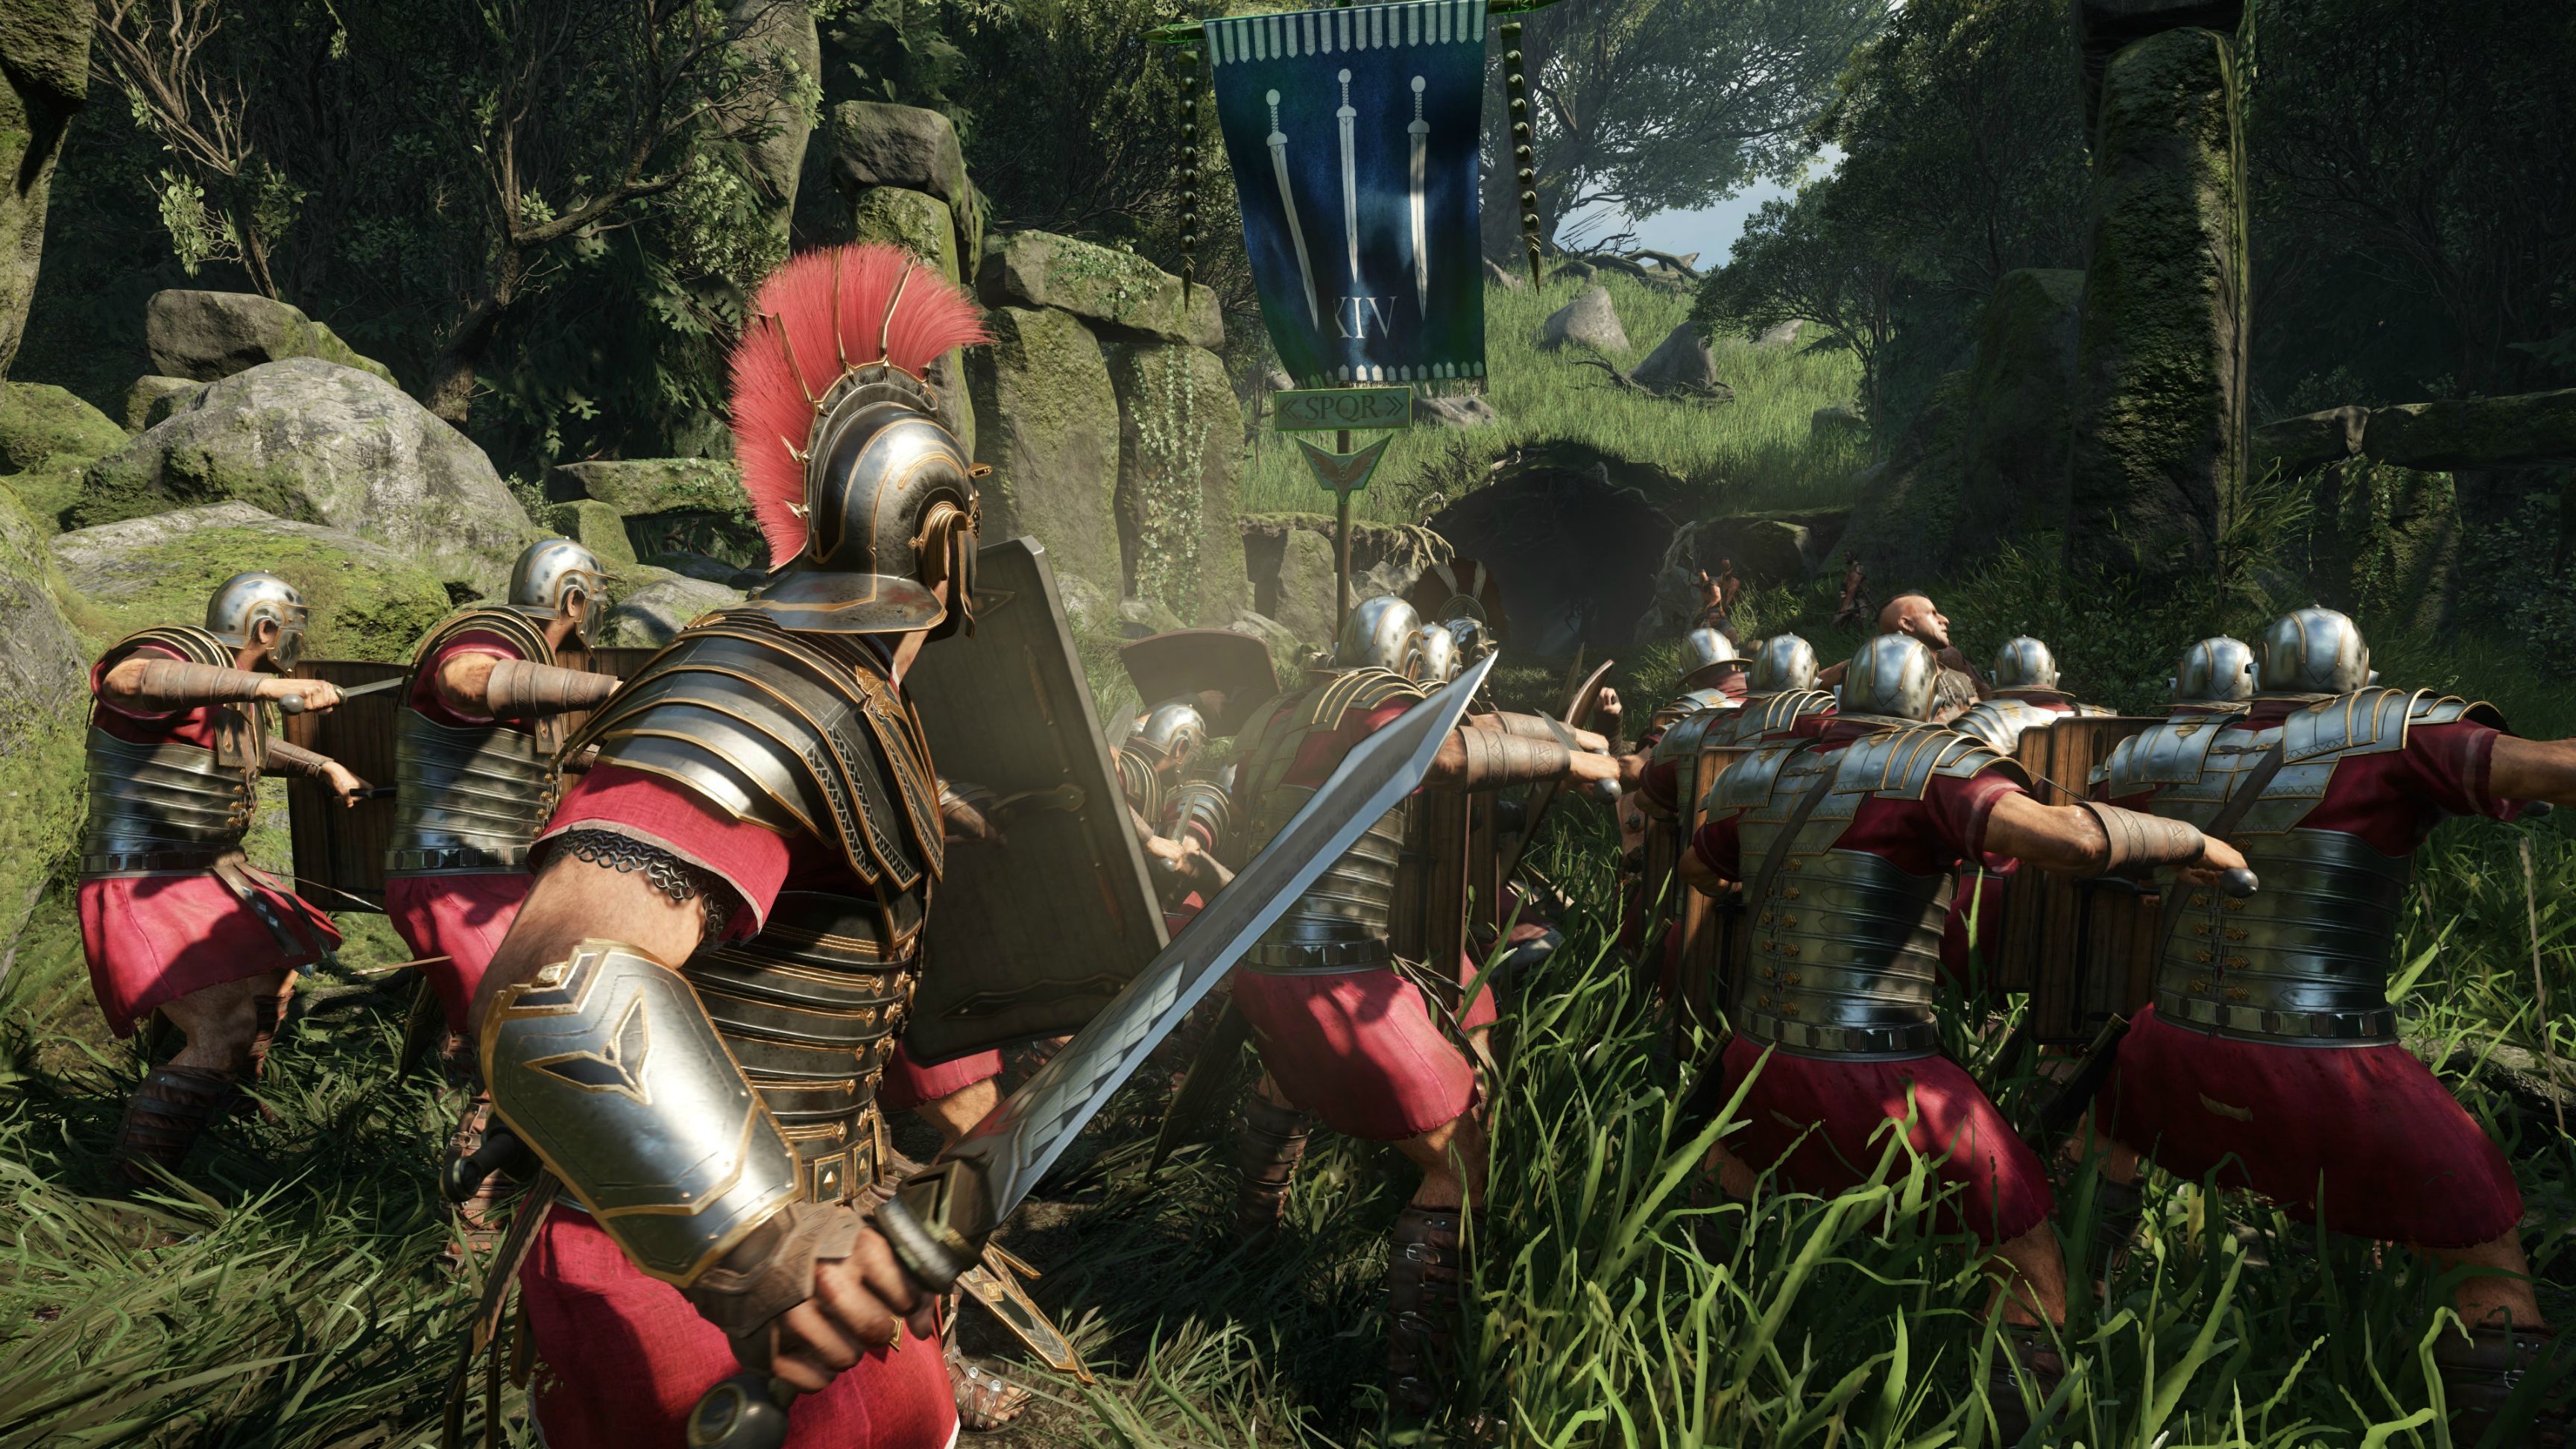 We arrived reached rome early in the. Игра son of Rome. Ryse: son of Rome. Игра Райс сон оф Рим. Ryse son of Rome Xbox 360.